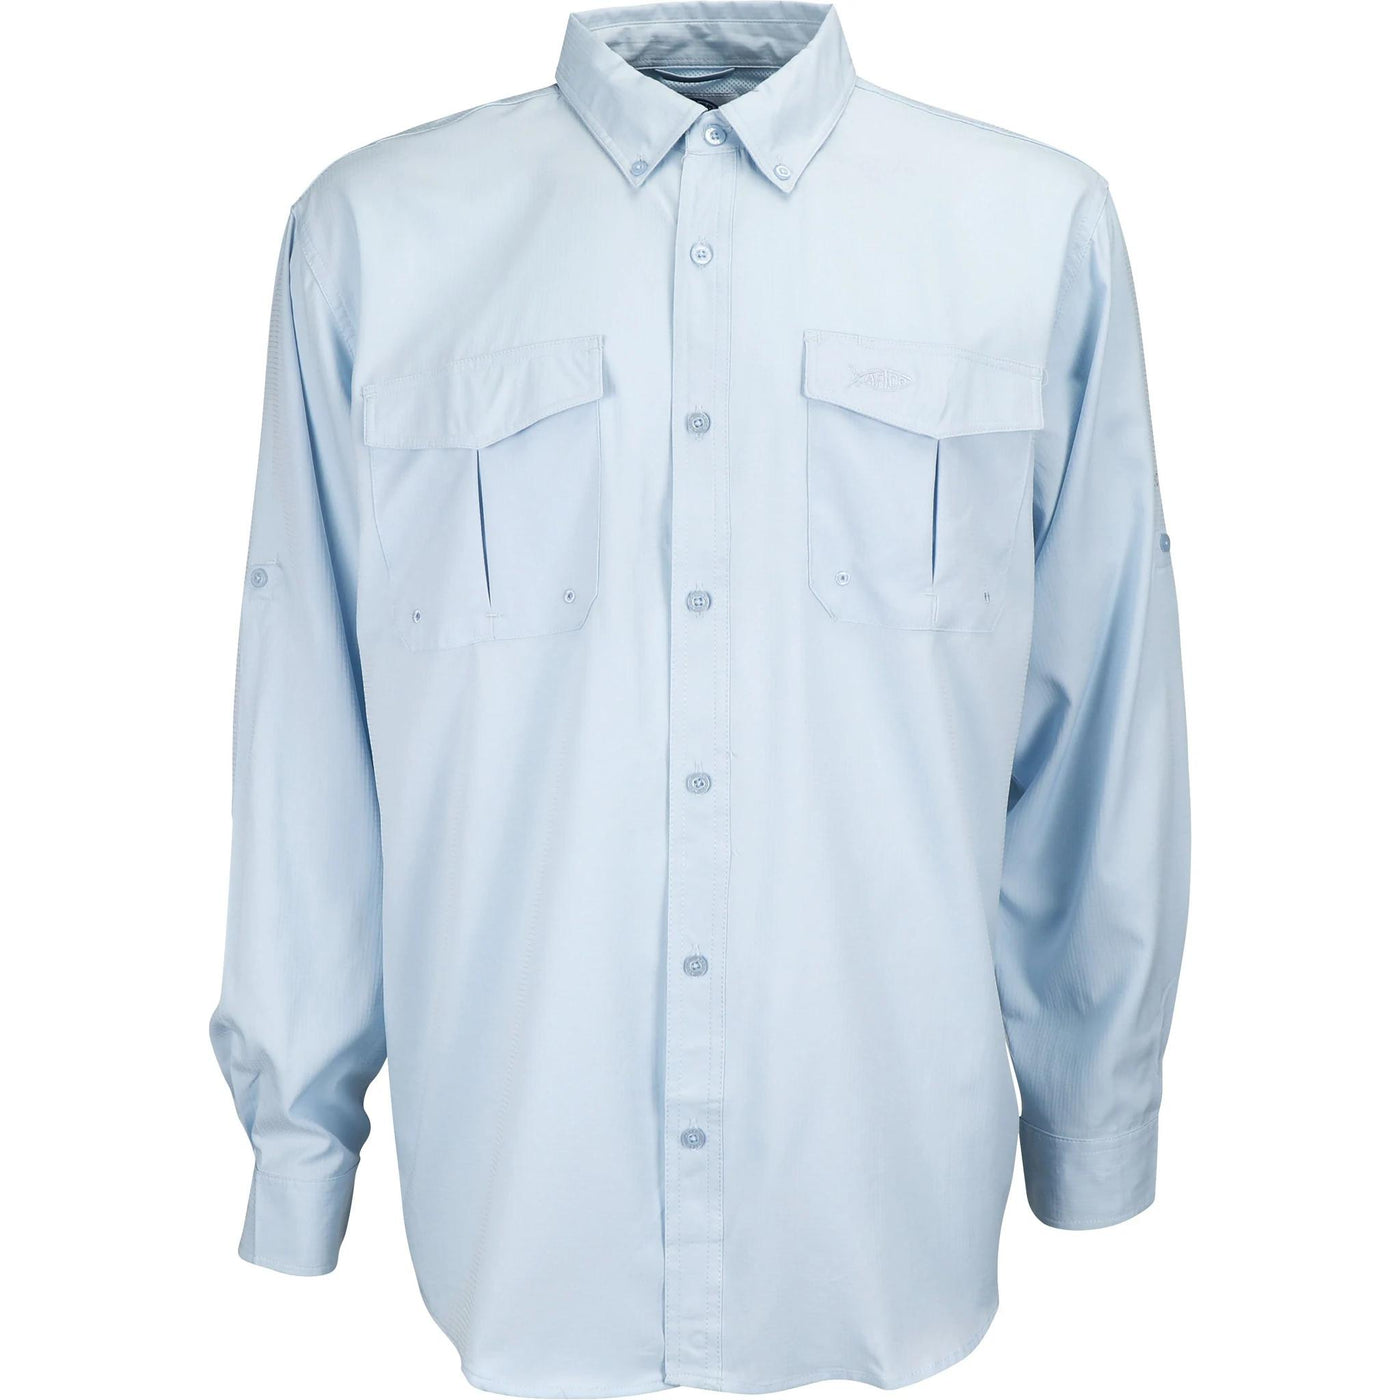 Aftco Rangle Vented L/S Shirt-MENS CLOTHING-Light Blue-M-Kevin's Fine Outdoor Gear & Apparel